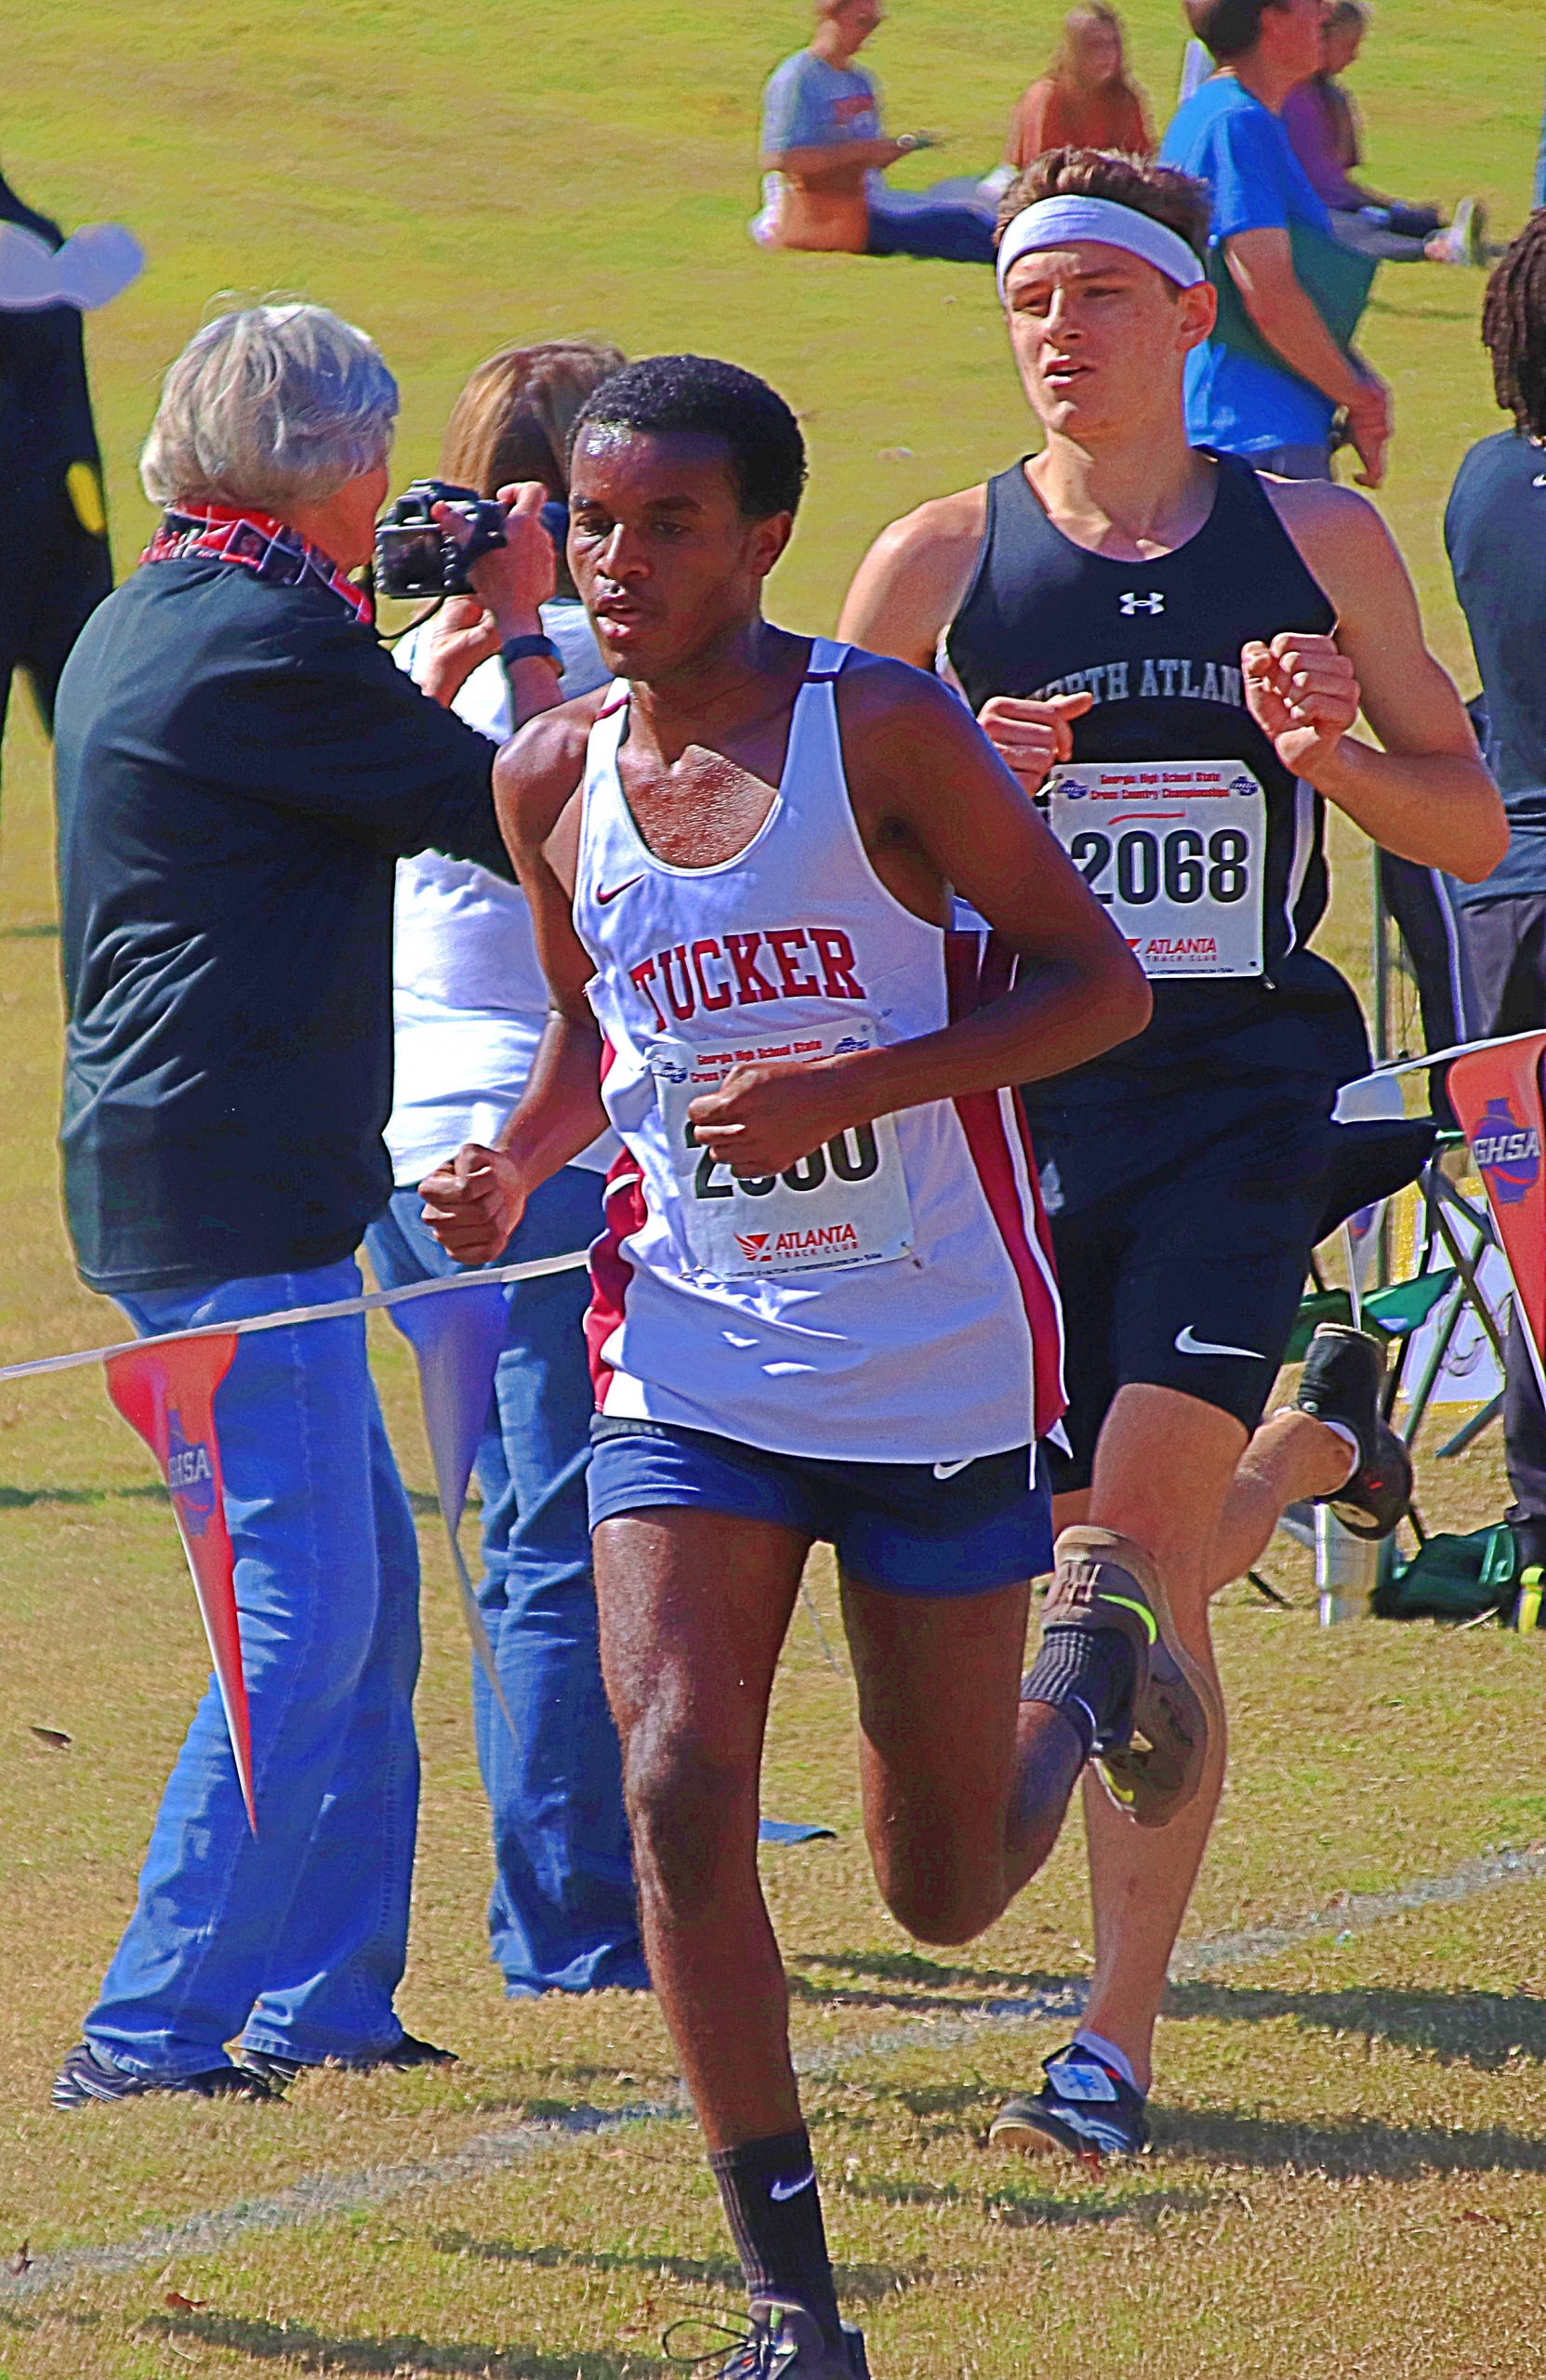 Tucker junior Yordanos Ephram clocked the best time for a DCSD boy competing at state with his 17:39.44 in the Class 6A race. (Photo by Mark Brock)